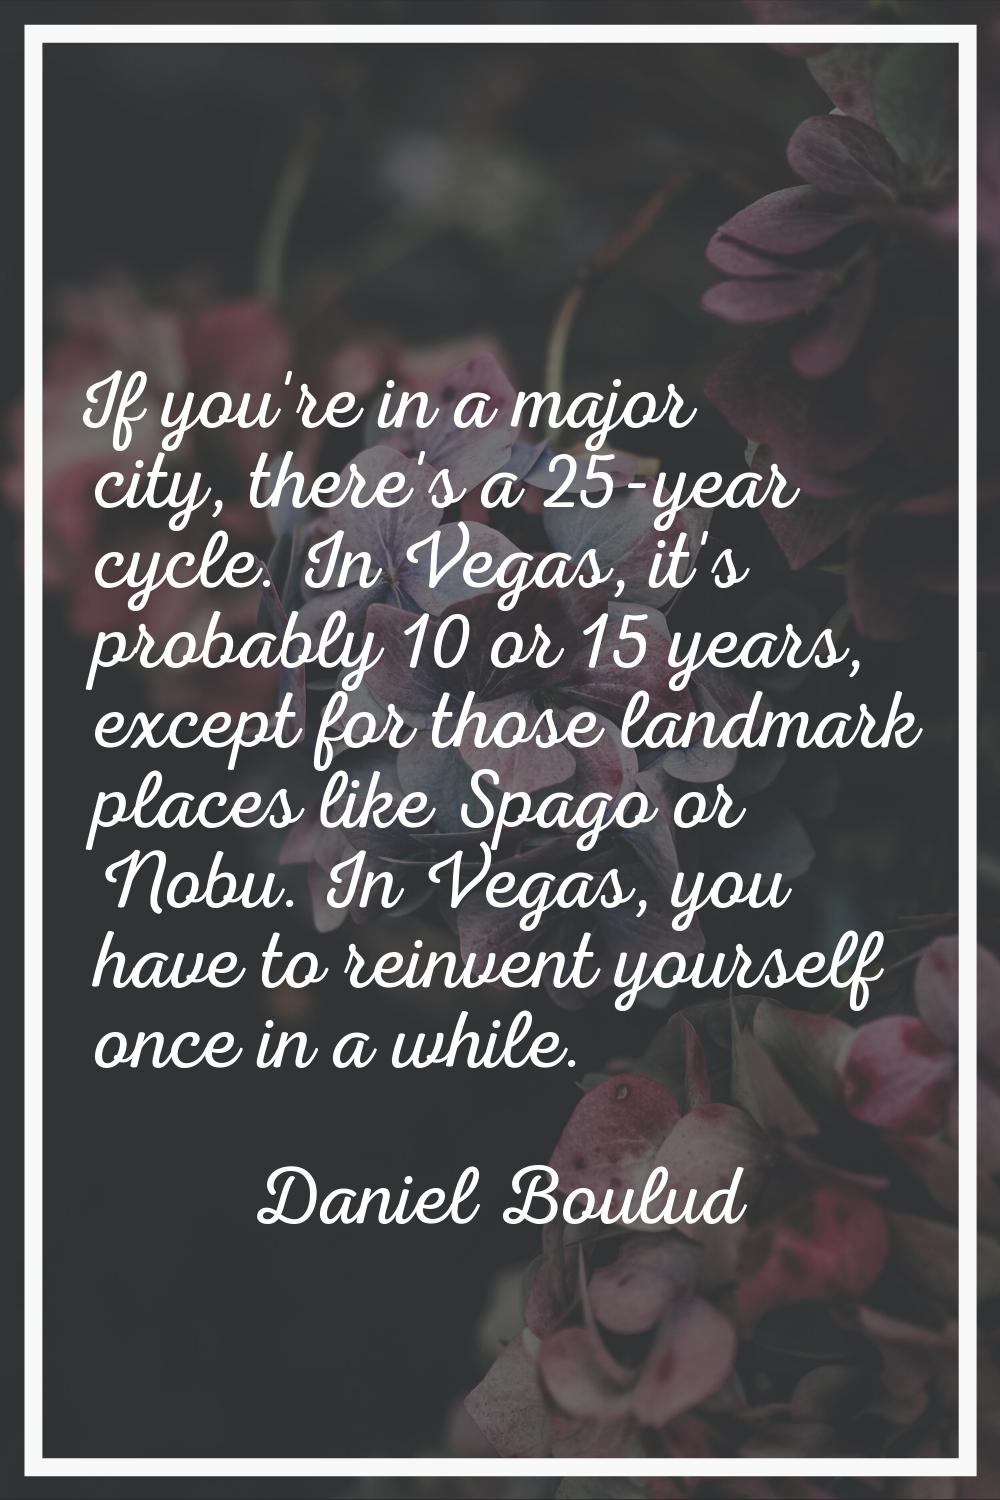 If you're in a major city, there's a 25-year cycle. In Vegas, it's probably 10 or 15 years, except 